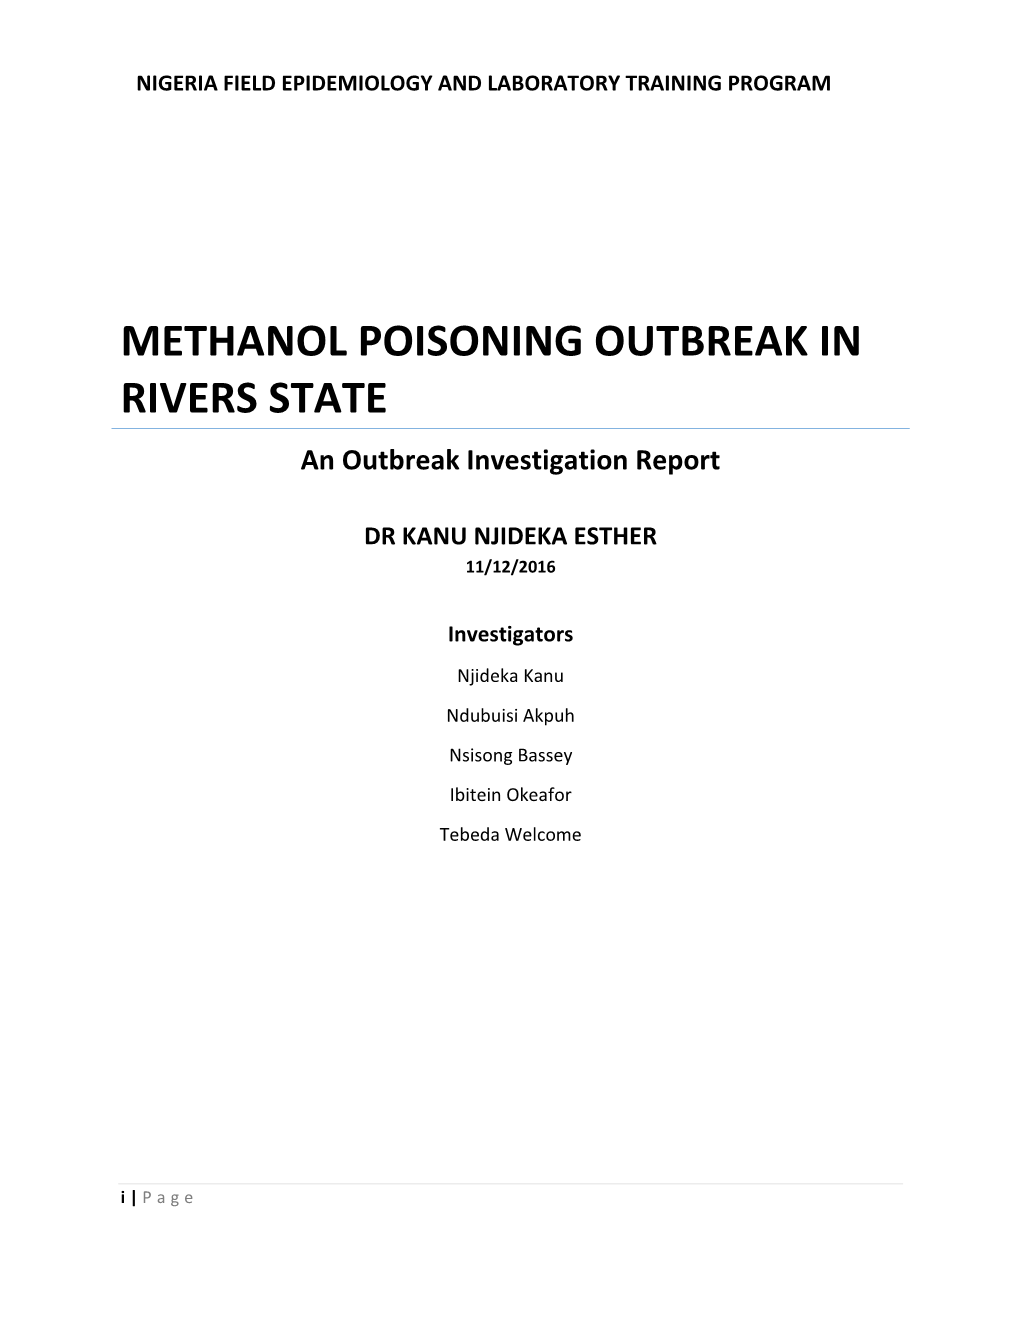 METHANOL POISONING OUTBREAK in RIVERS STATE an Outbreak Investigation Report